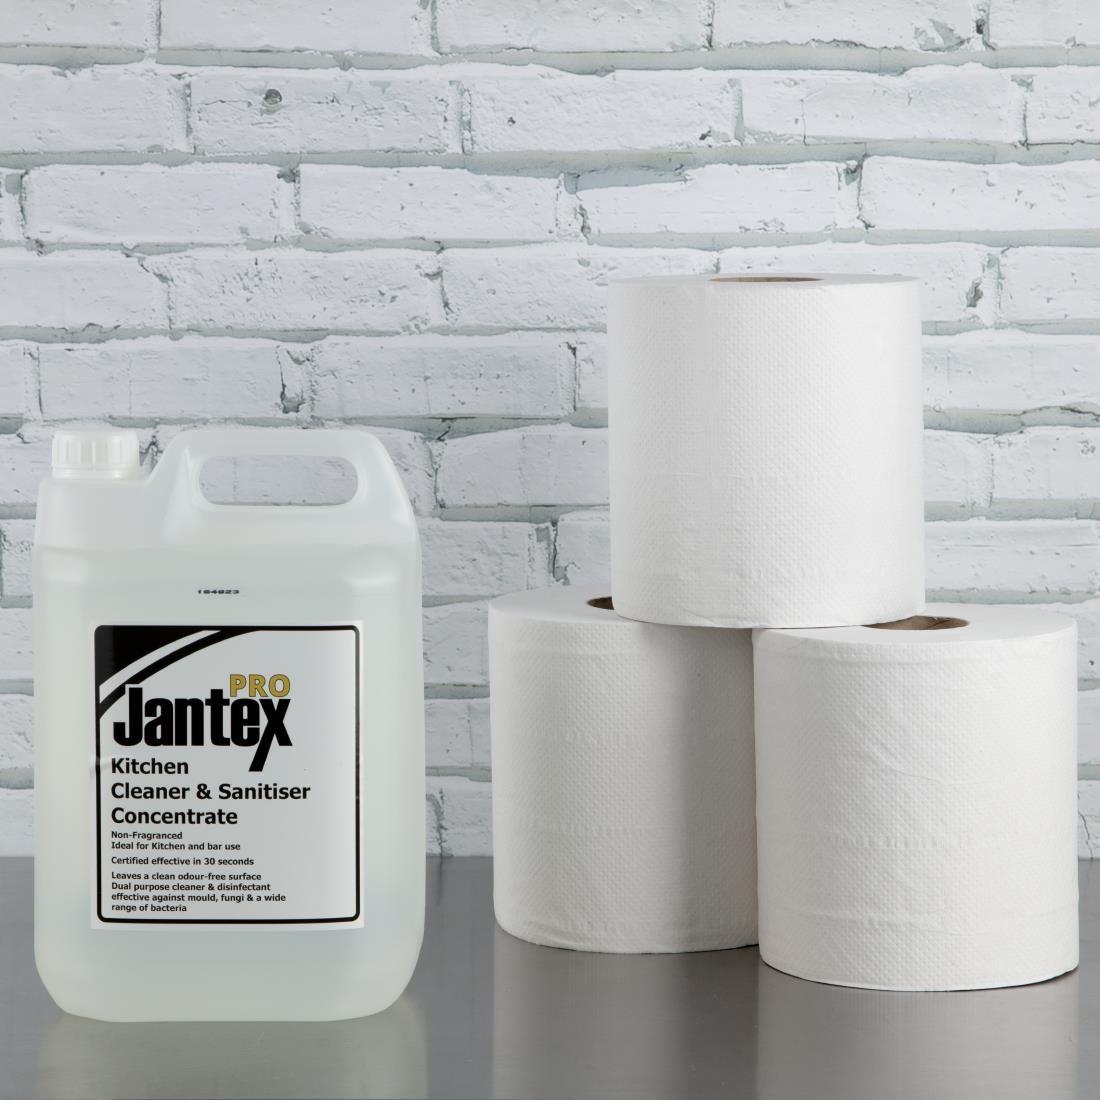 Jantex Centrefeed White Rolls 2-Ply 120m (Pack of 6) - DL920  - 7